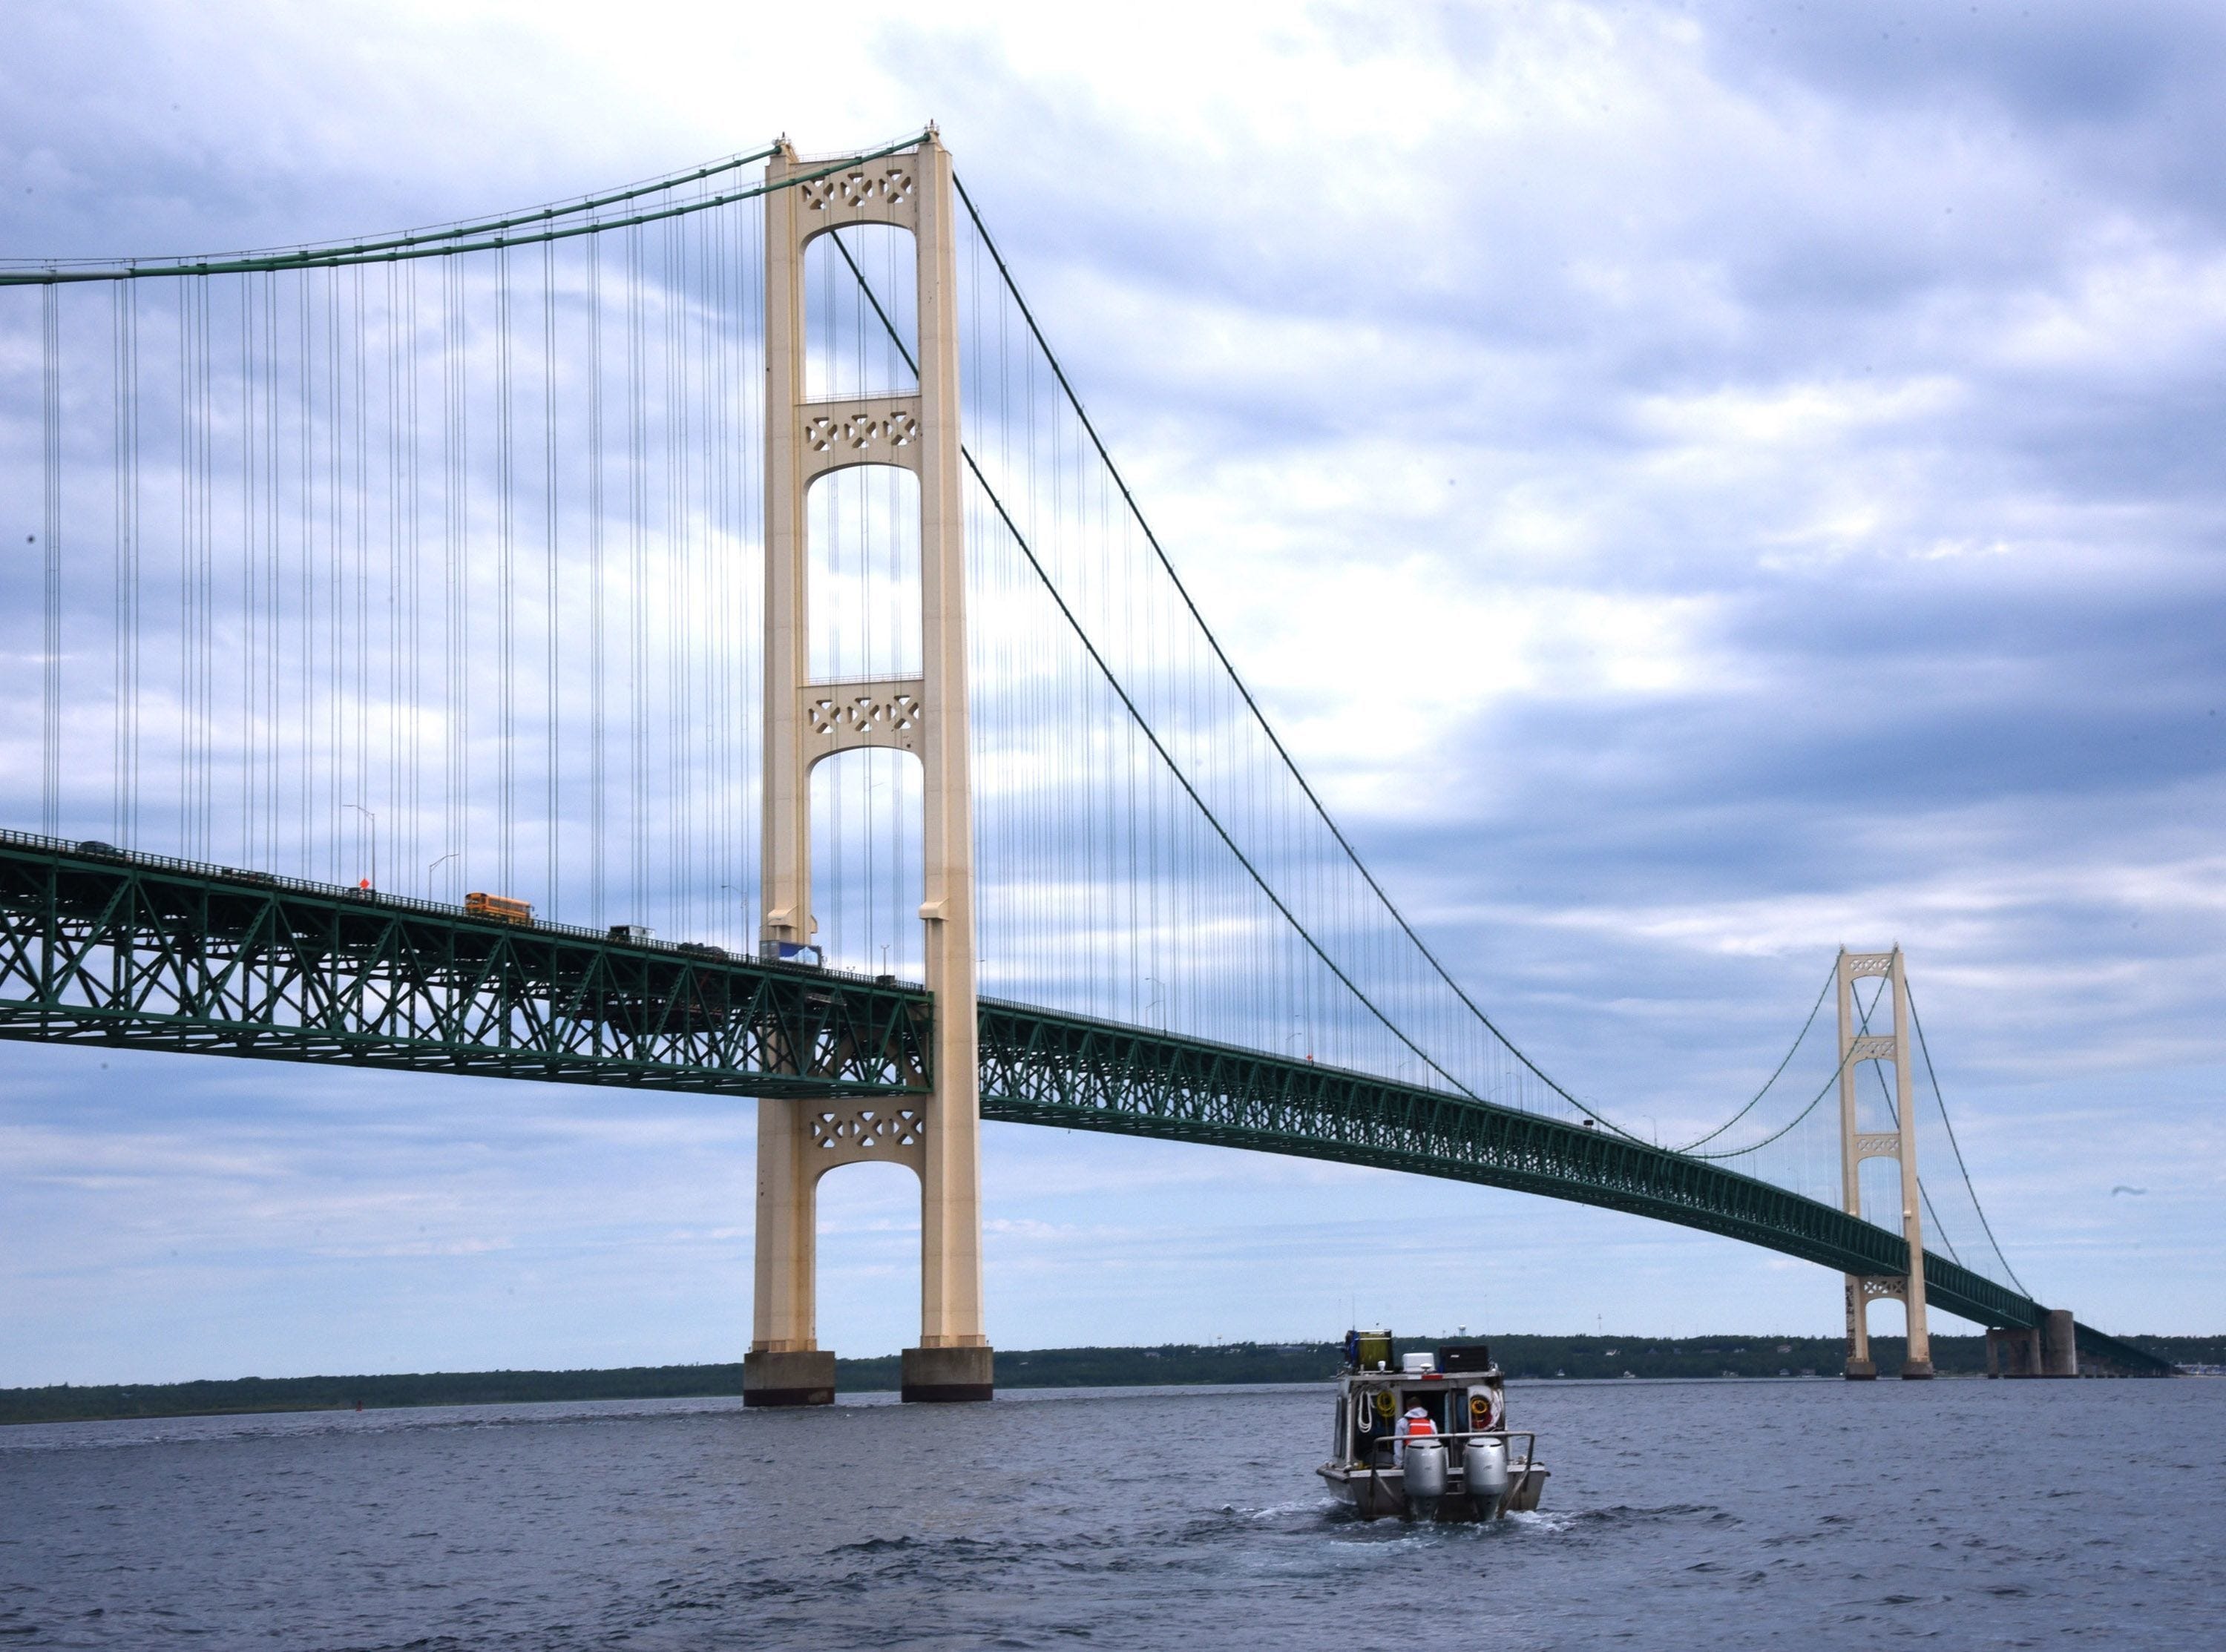 Oil pipeline operator Enbridge moves under the Mackinac Bridge on their way to inspect their controversial Line 5 under the Straits of Mackinac Wednesday, June 8, 2016. Using an autonomous underwater vehicle and a roving underwater vehicle over several days, the entire five-mile-long pipeline, which rests on supports along the bottom of Lake Michigan, will have been covered by both sonar and visual means.